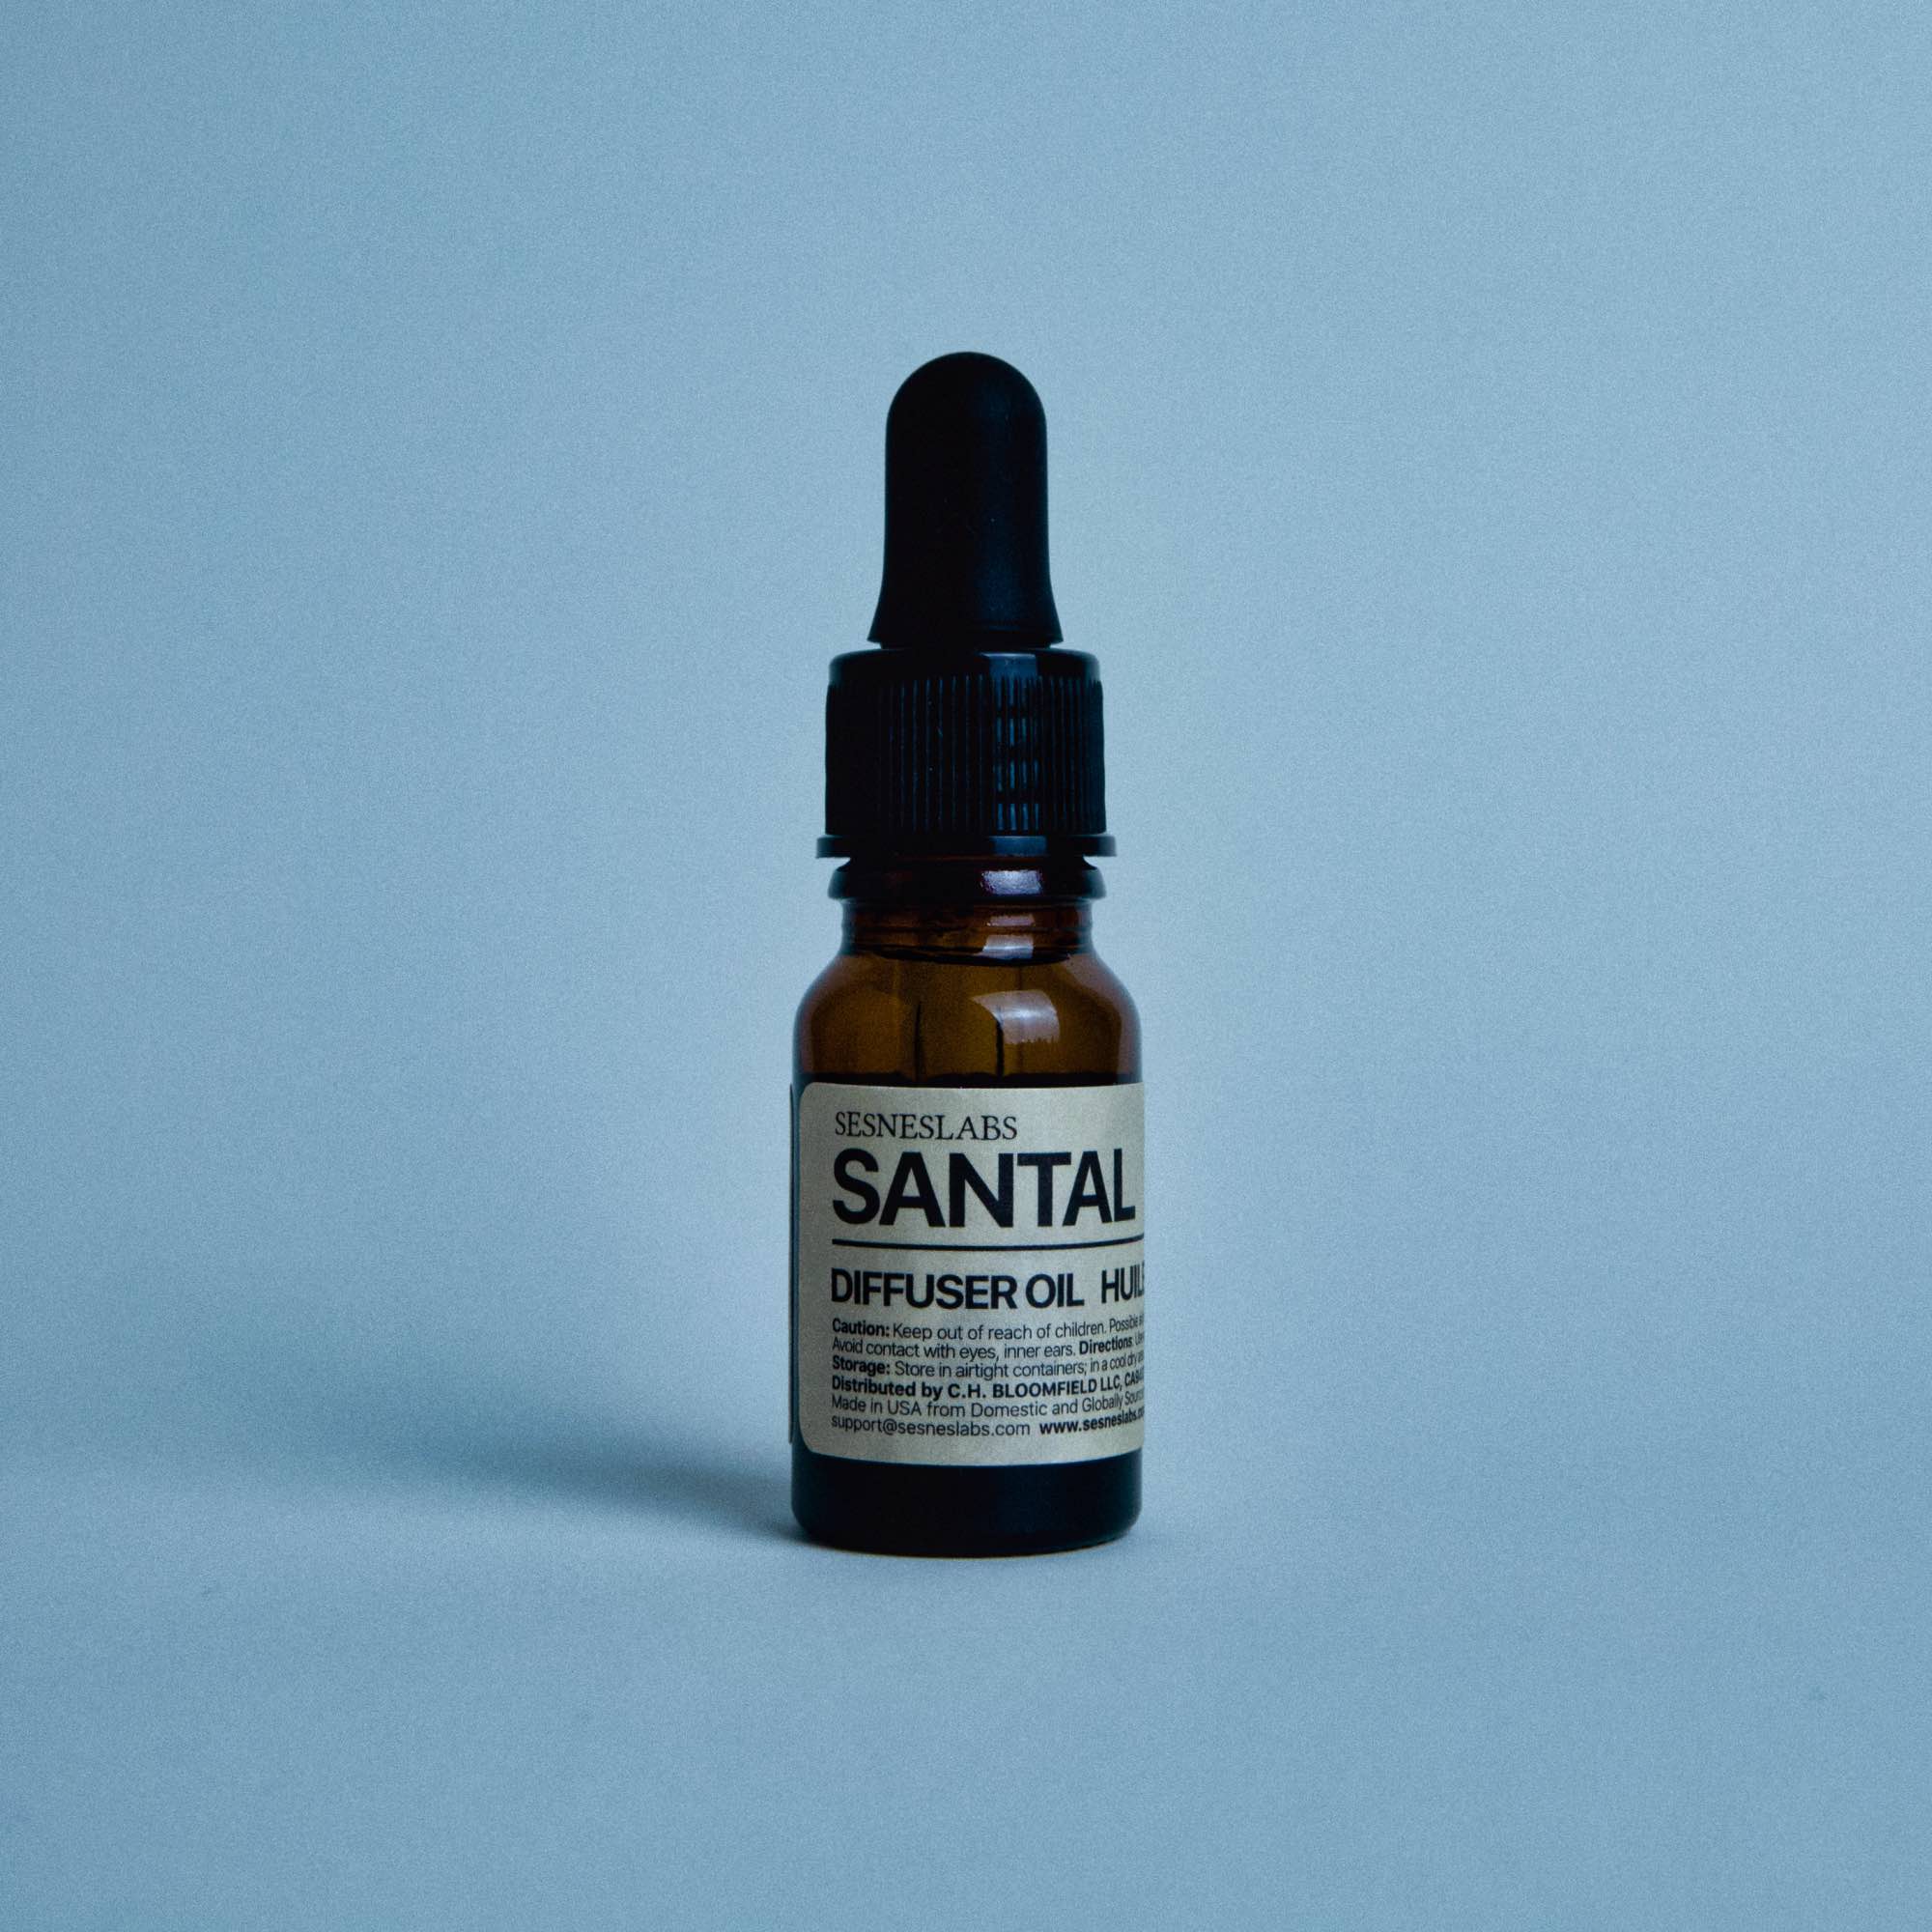 Santal Essential Oil, For diffuser, mix with other scents